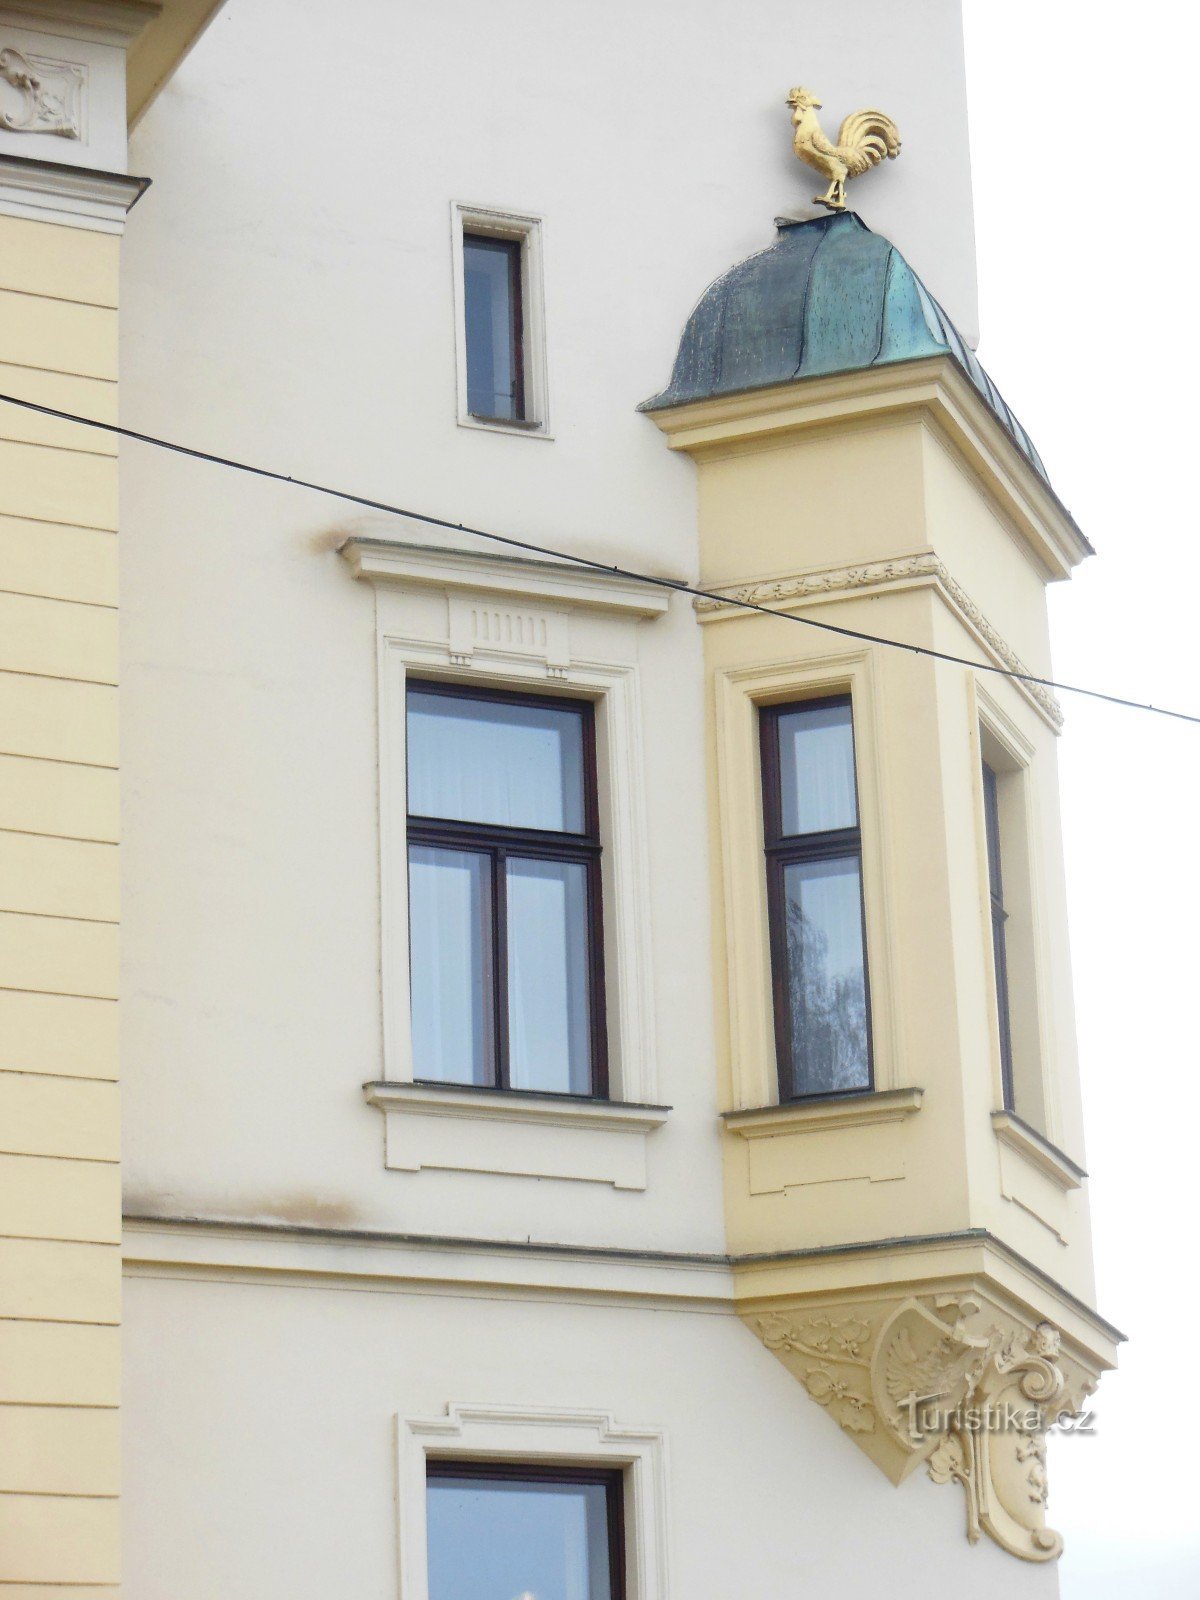 detail of the building